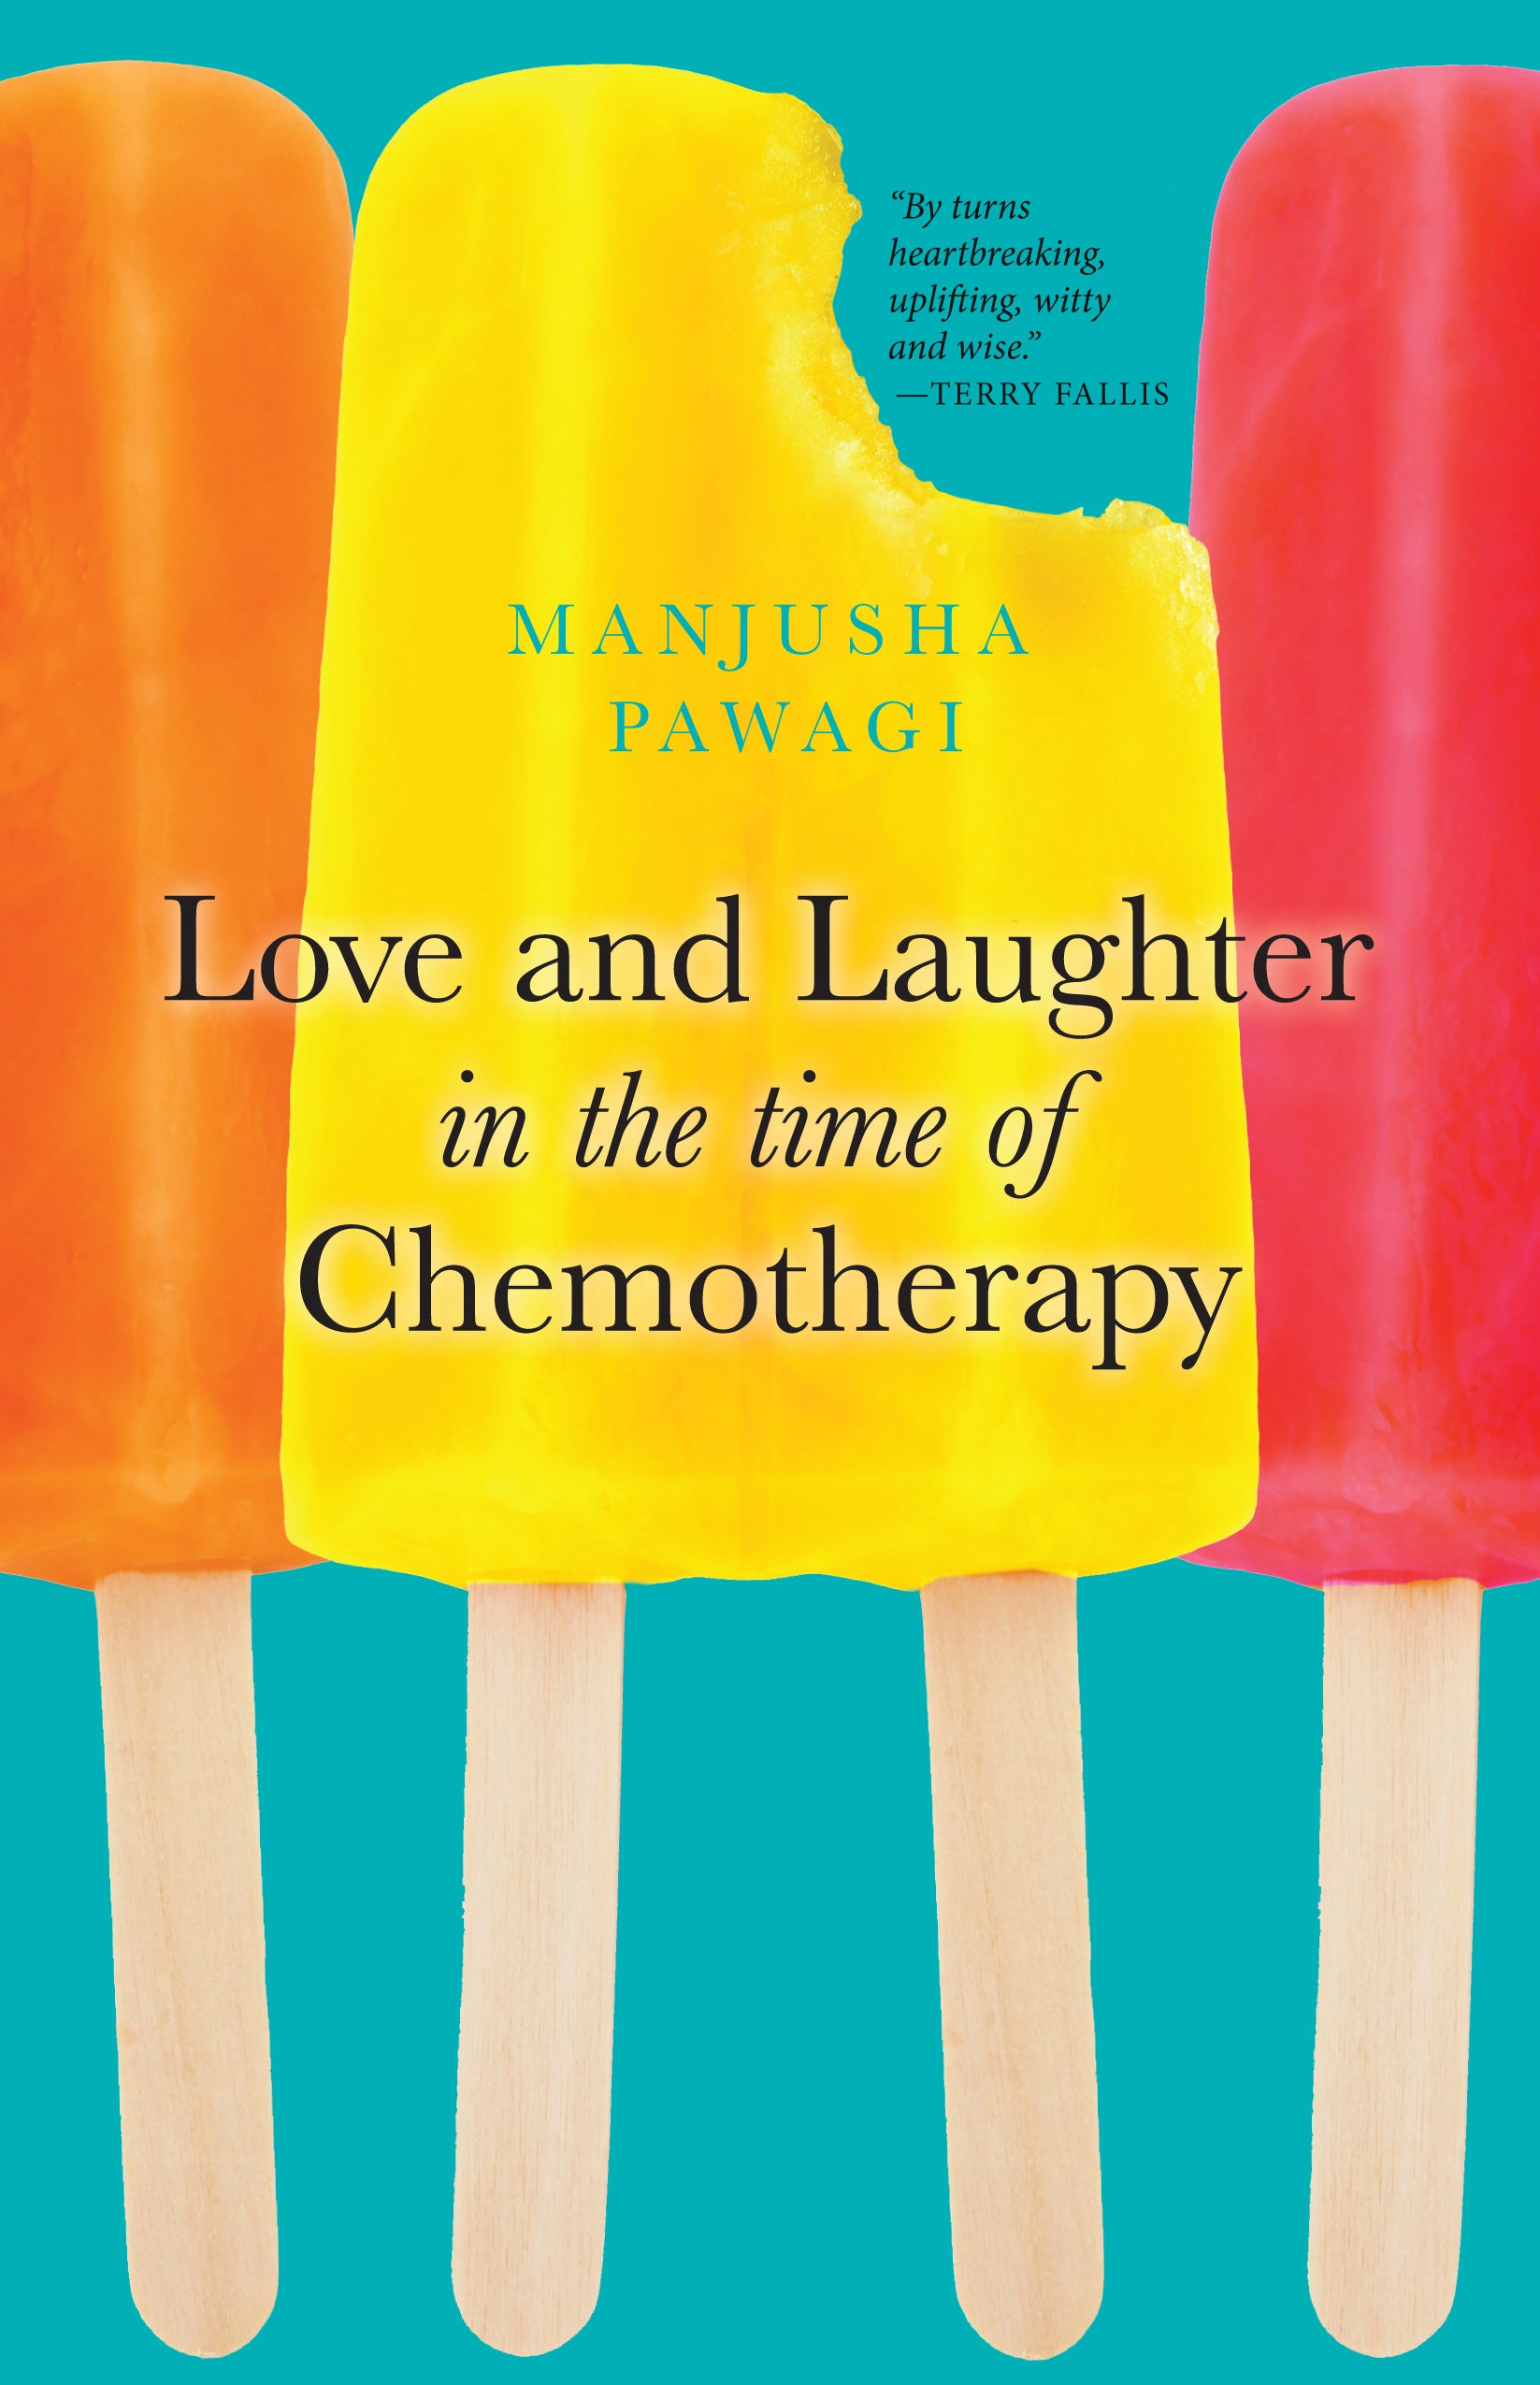 Love and Laughter in the Time of Chemotherapy-ebook